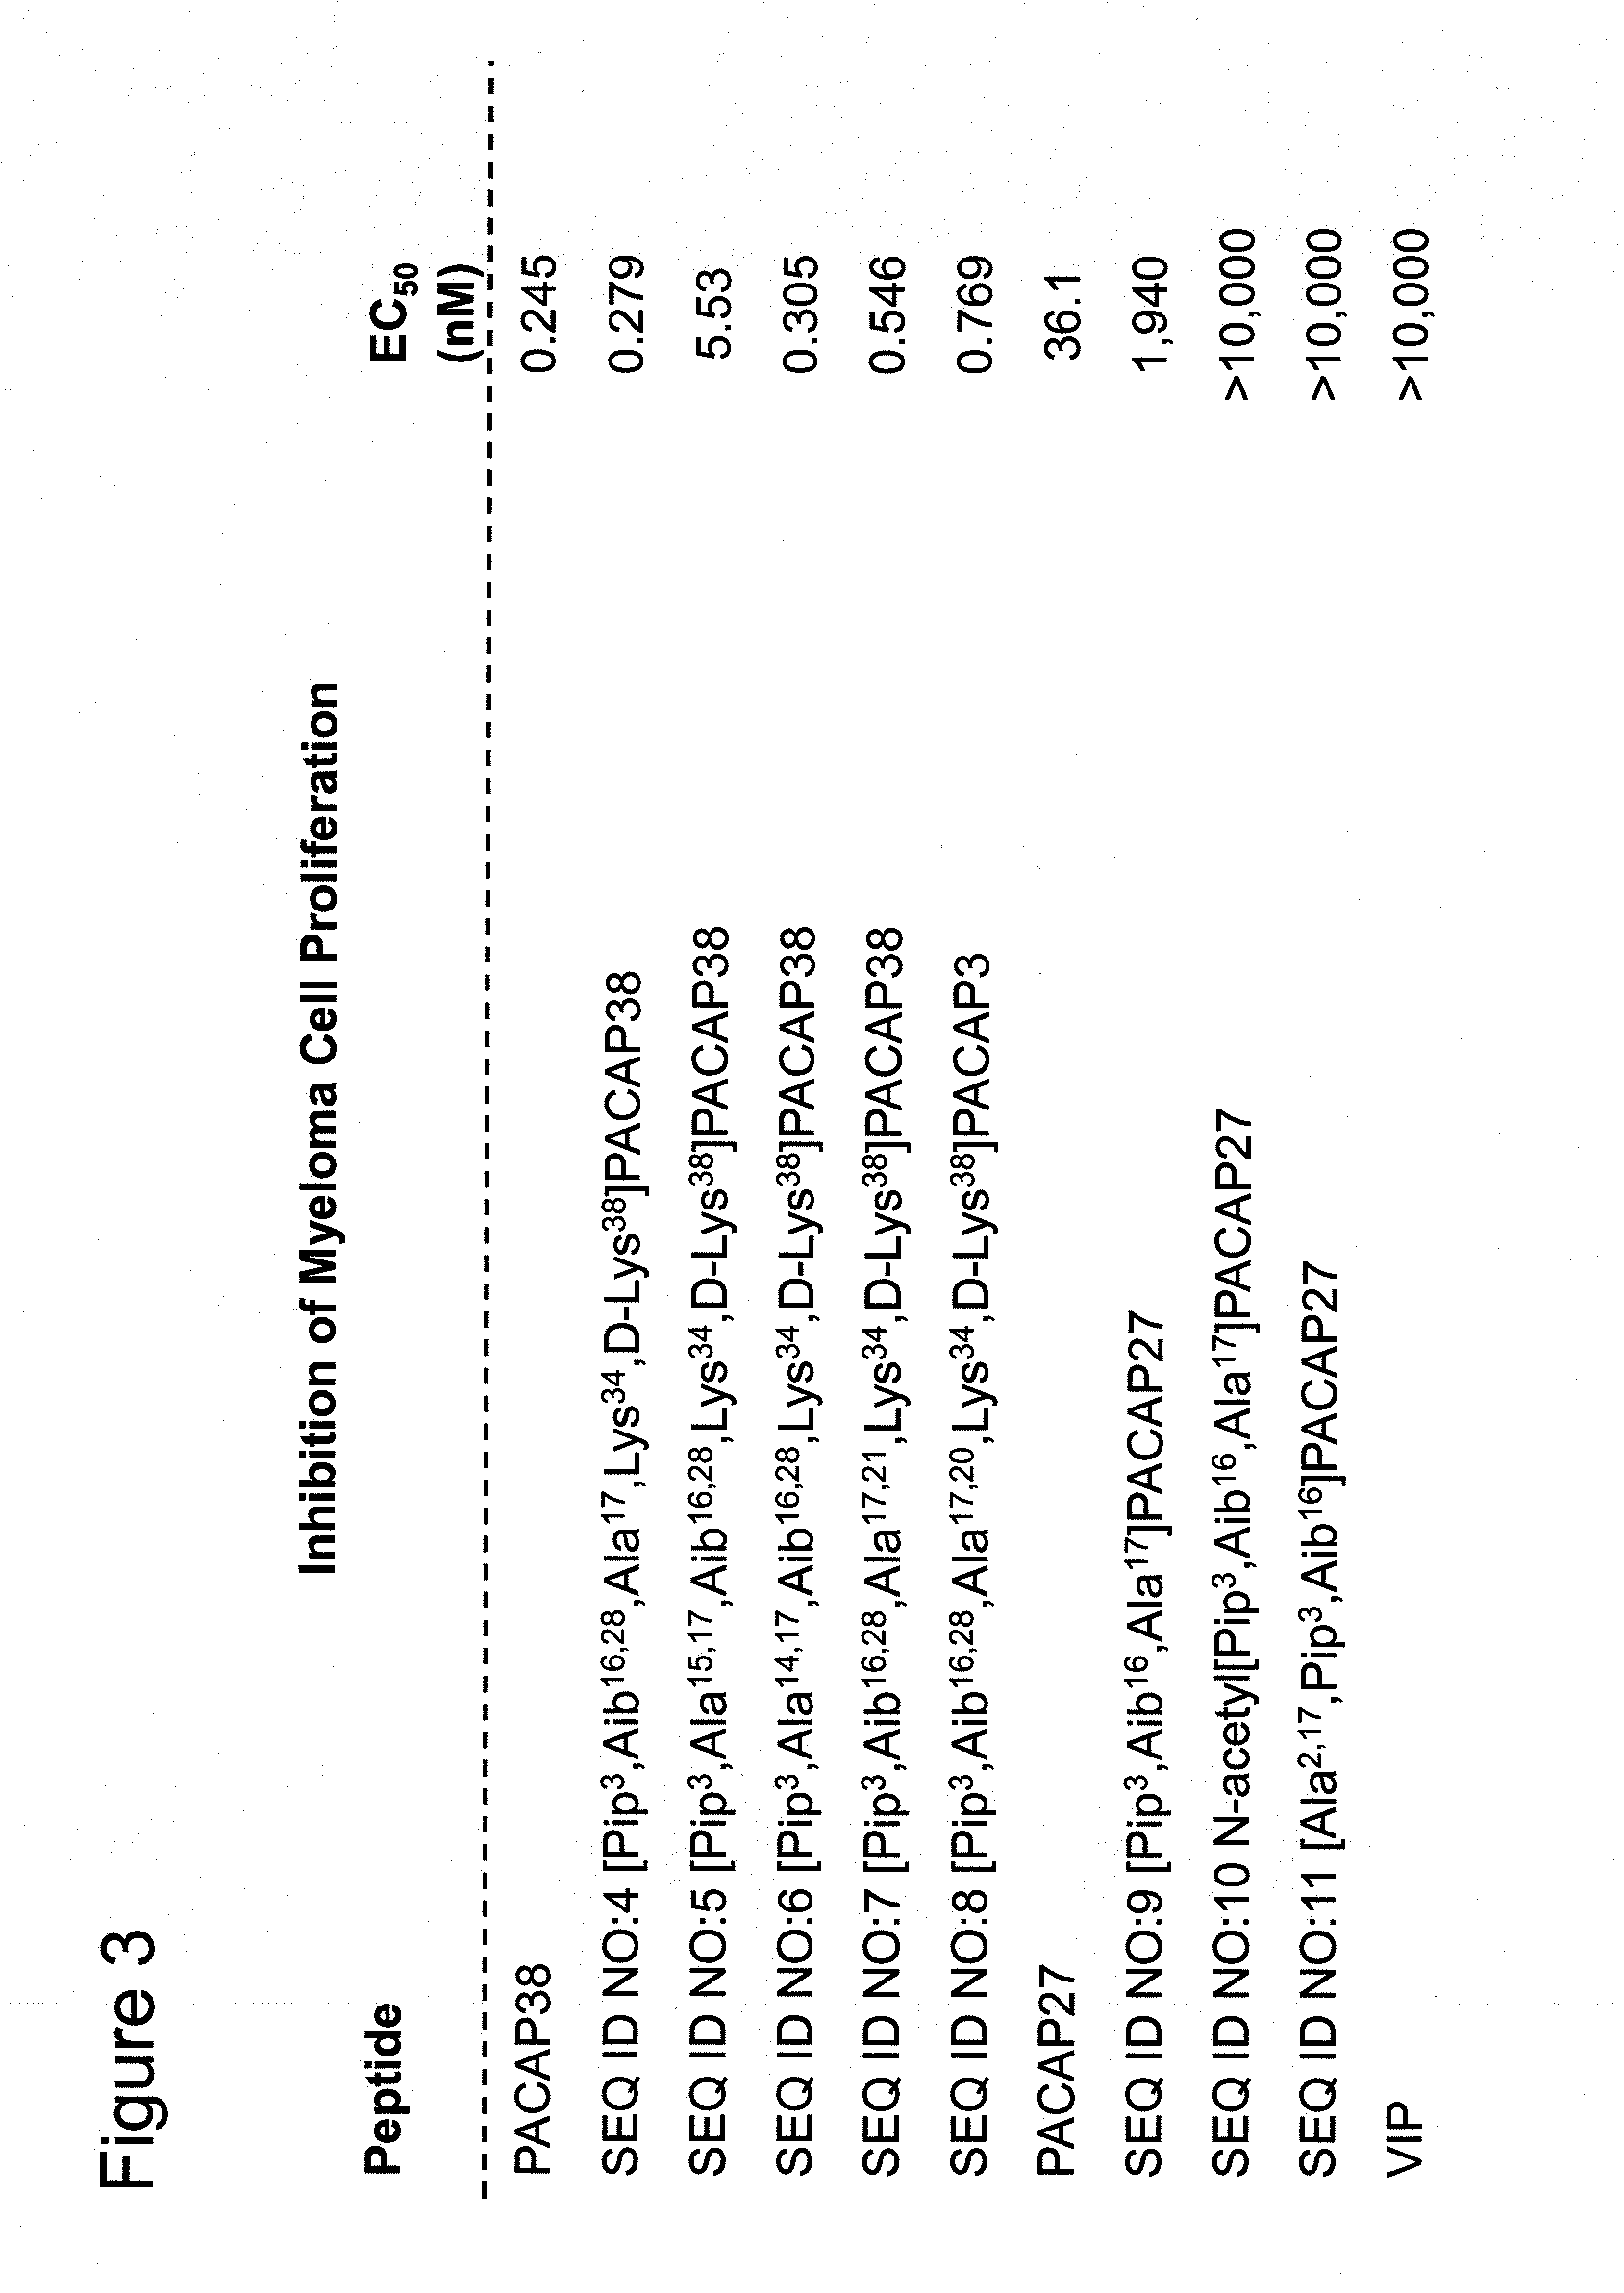 Analogs of pituitary adenylate cyclase-activating polypeptide (PACAP) and methods for their use